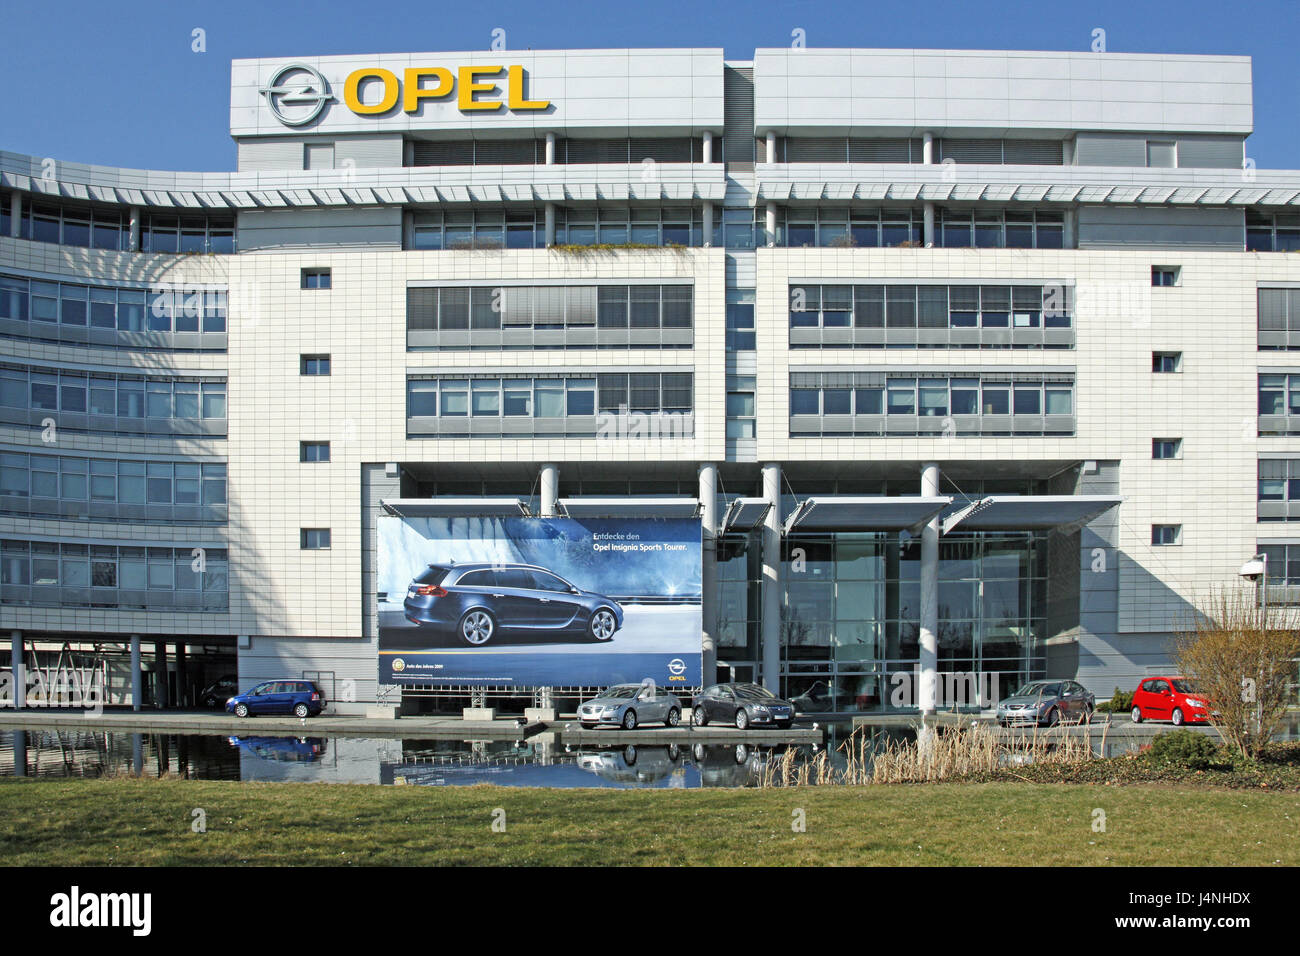 Germany, Hessen, trunk home, Opel house, outside, no property release, building, Opelhaus, Opel opus, Opelwerk, car dealer, Opel, company logo, Opel logo, logo, VEHICLE, automaker, car industry, GM, vehicles, cars, reflexion, advertisement poster, poster, advertisement, Stock Photo